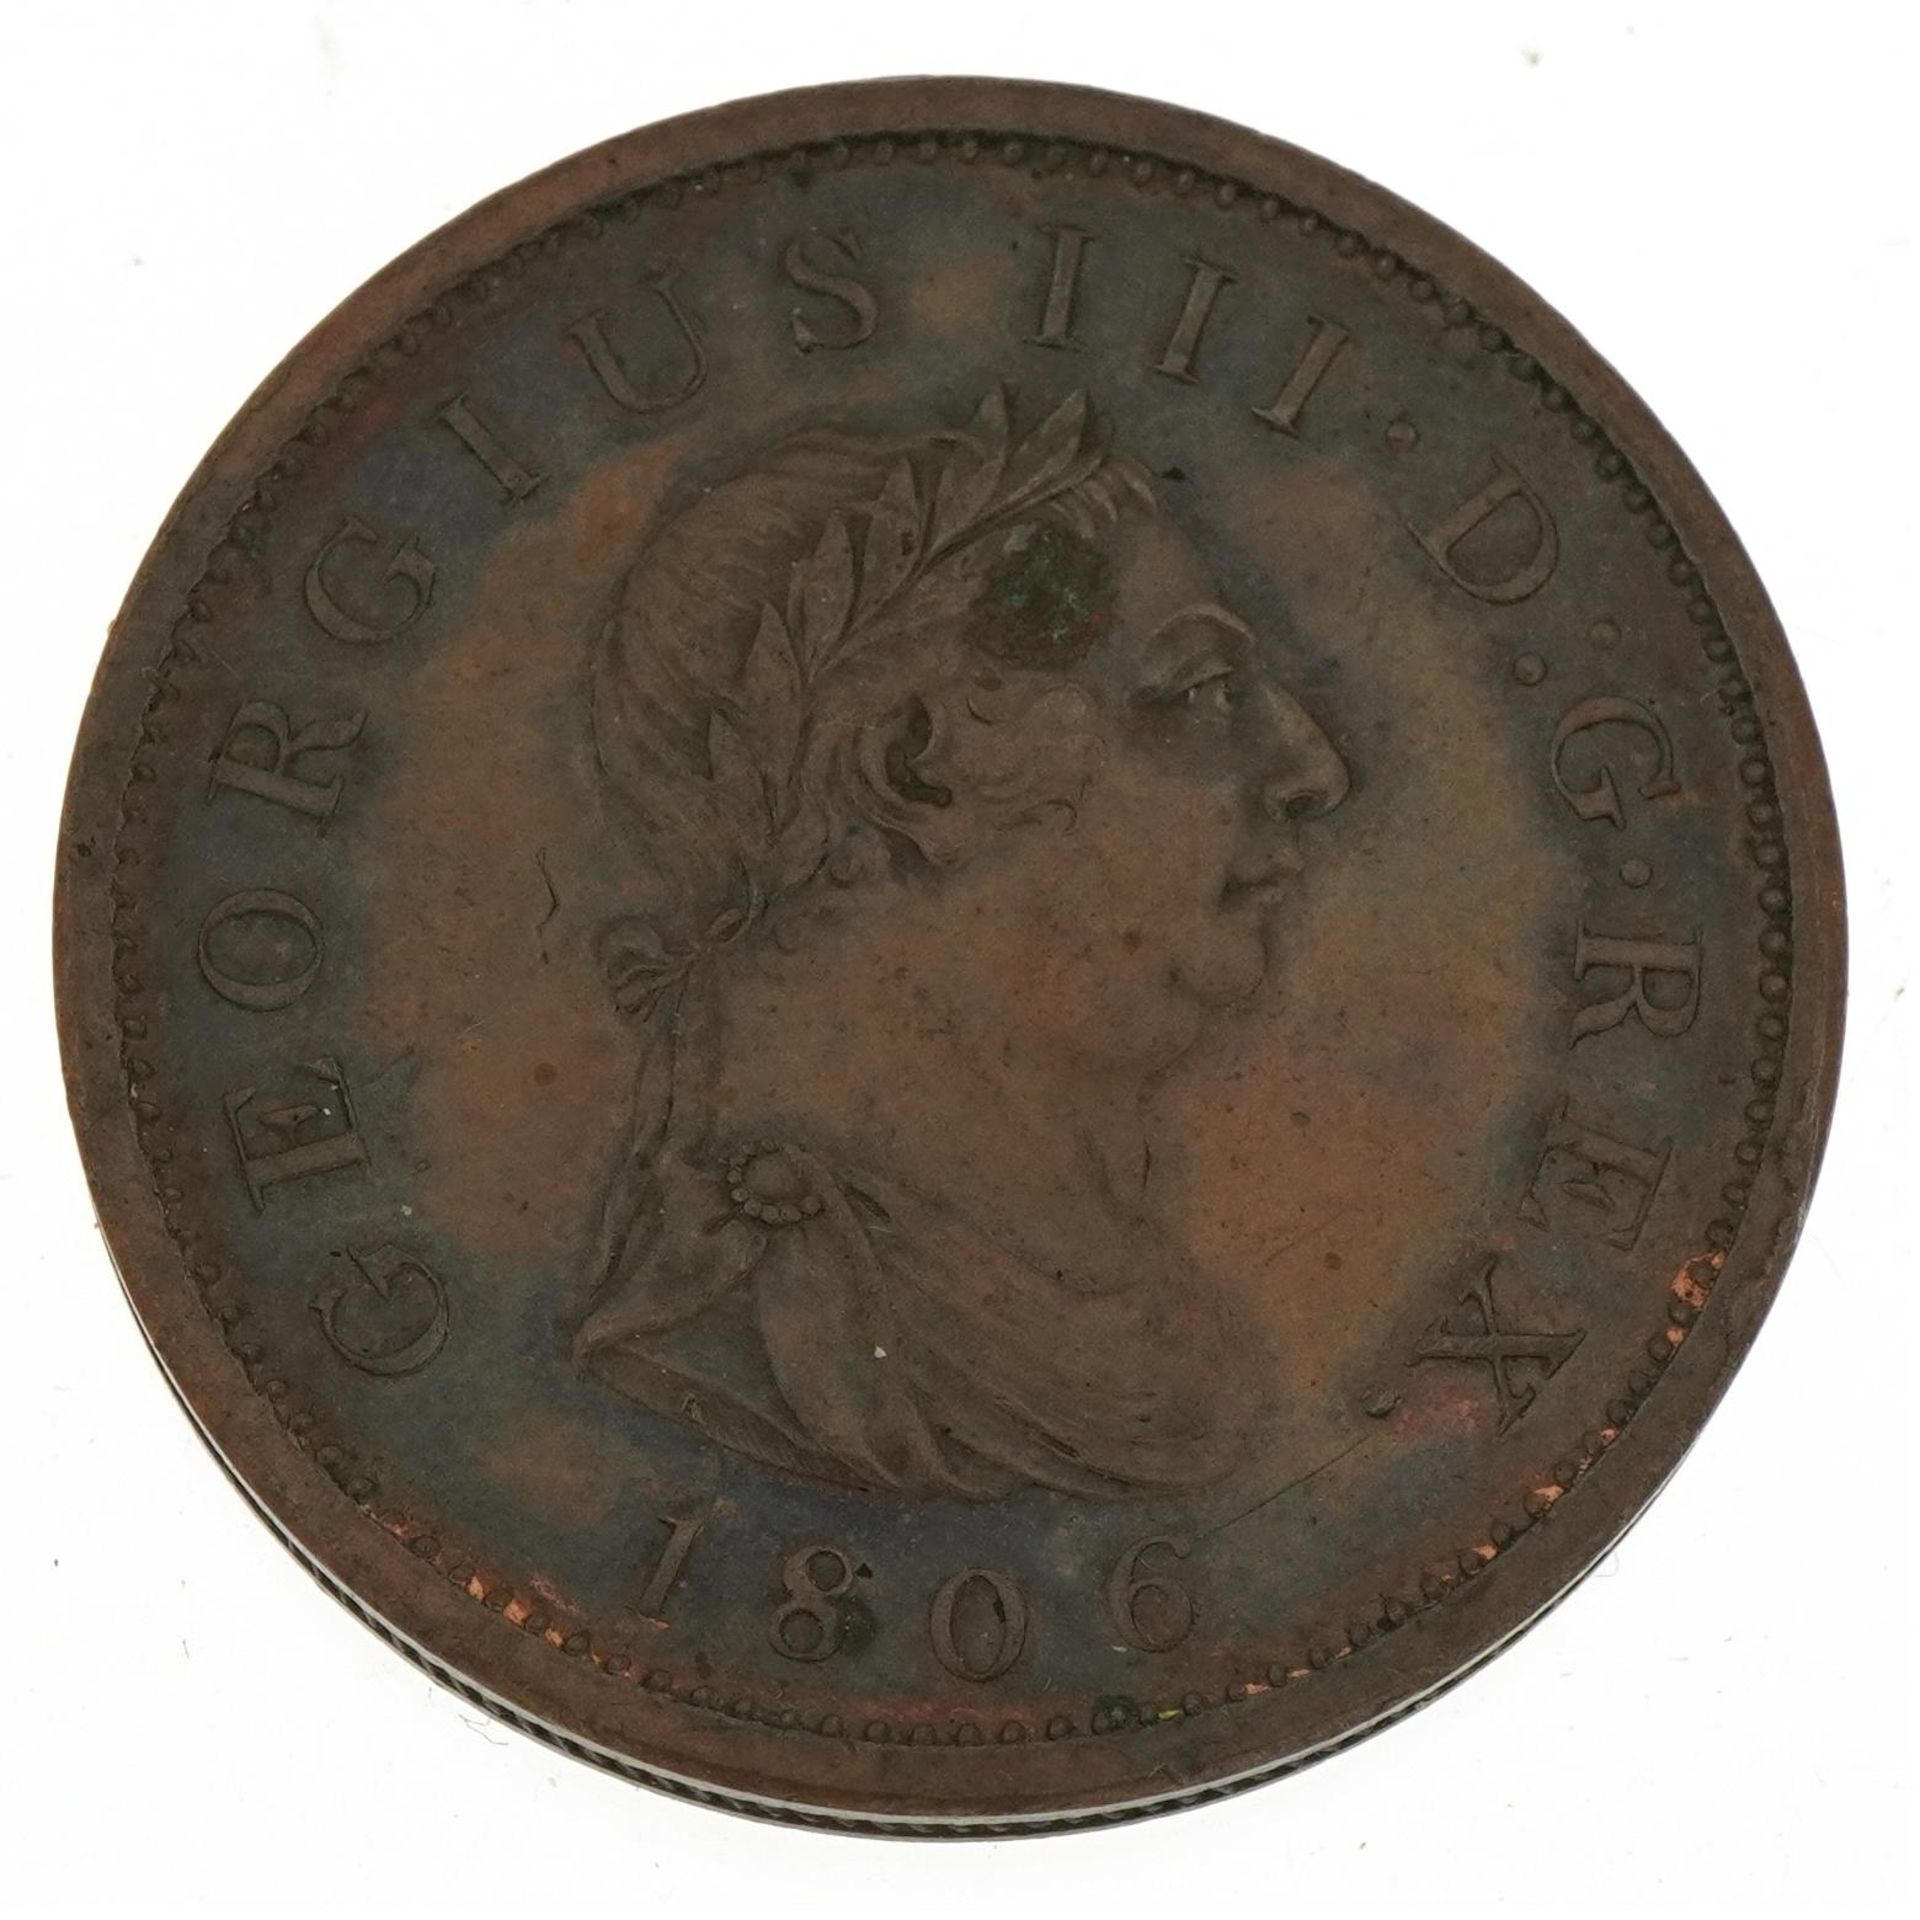 George III 1806 penny For further information on this lot please contact the auctioneer - Image 2 of 2